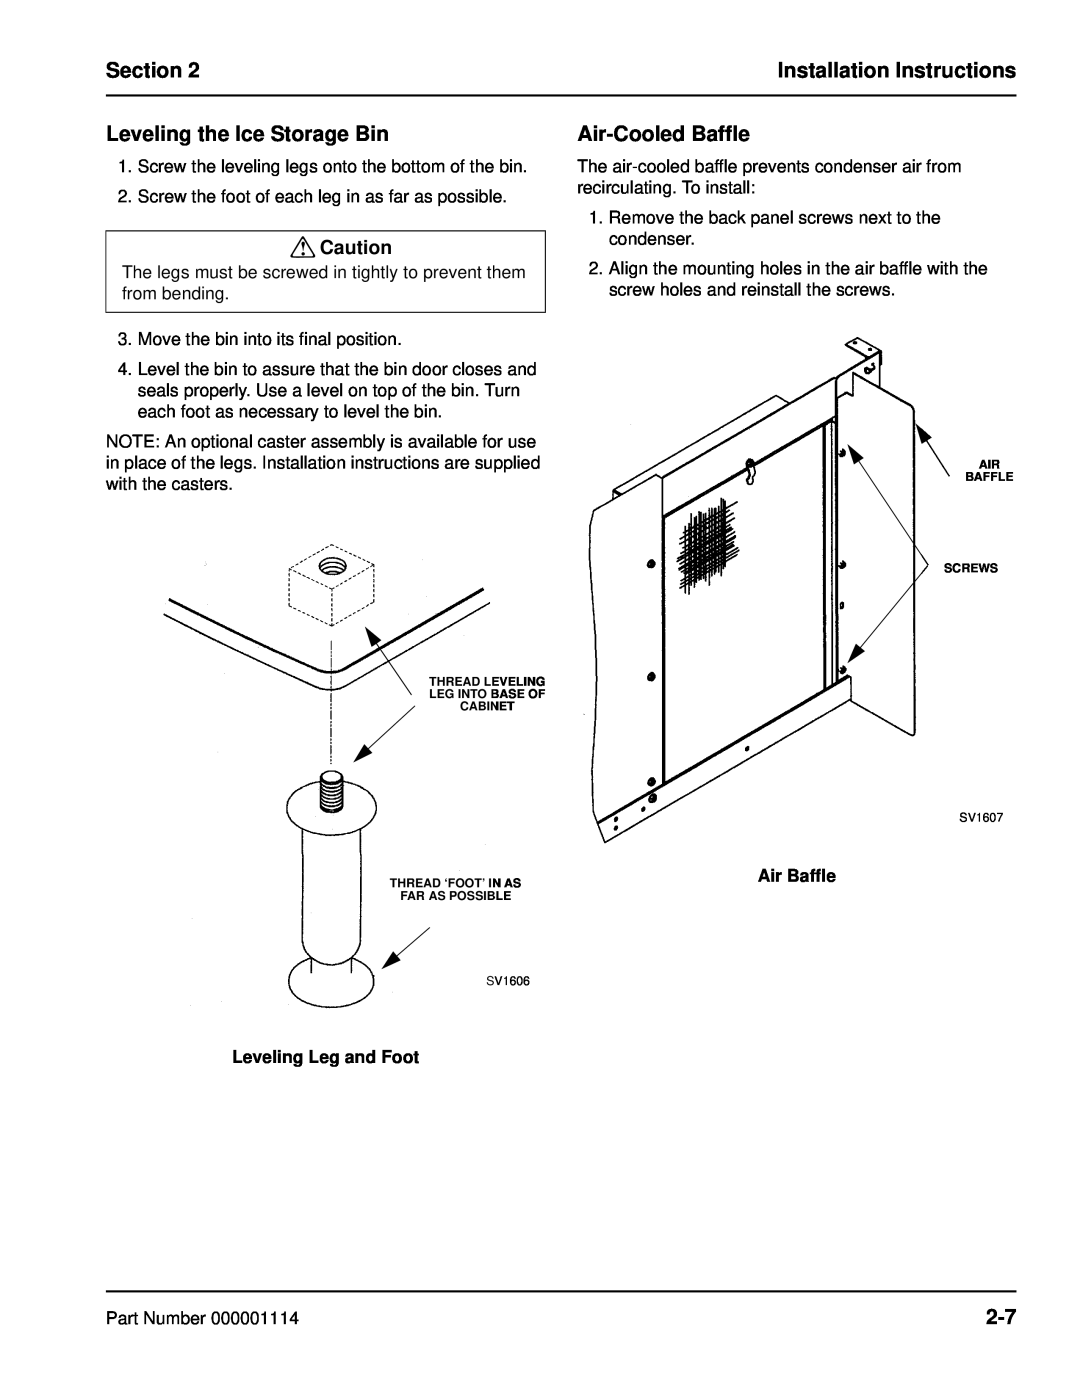 Manitowoc Ice Q manual Leveling the Ice Storage Bin, Air-CooledBaffle, Leveling Leg and Foot, Air Baffle, Section 